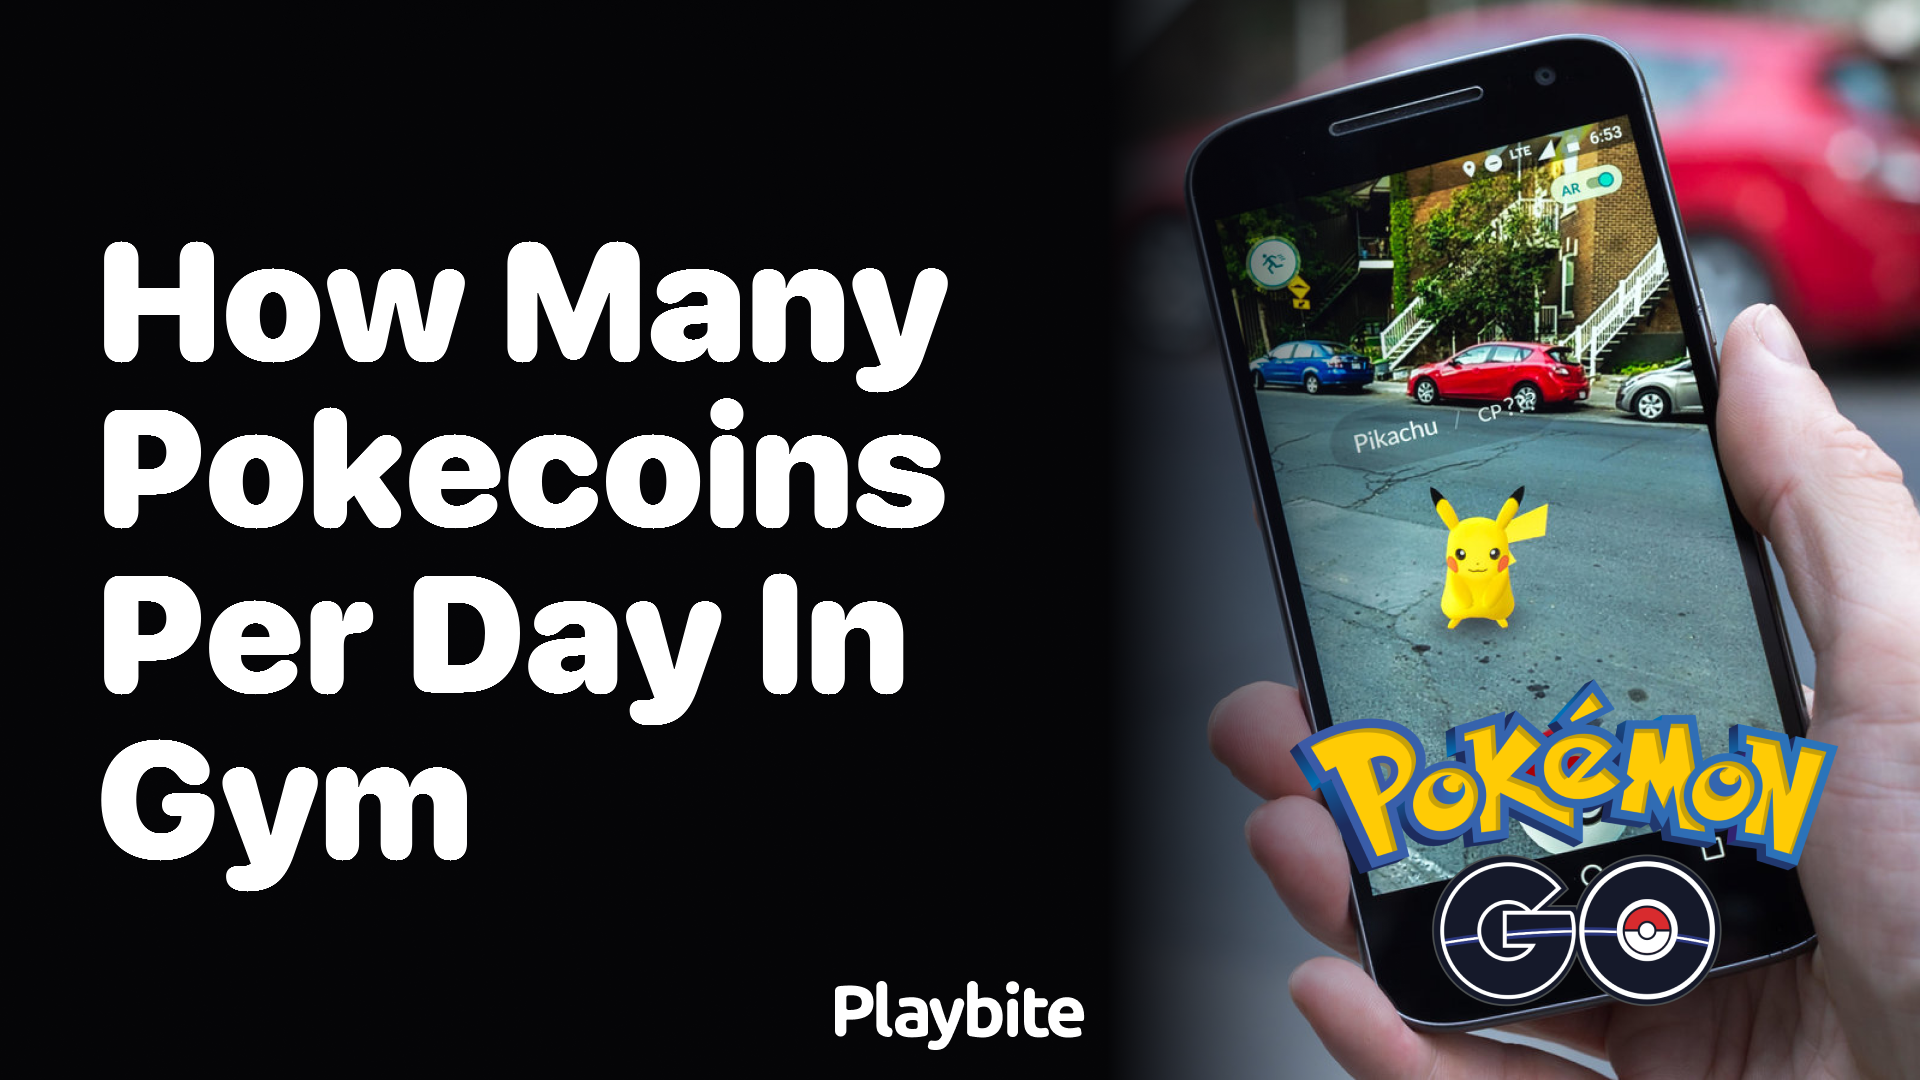 How Many PokeCoins Can You Earn Per Day From Gyms in Pokemon GO?